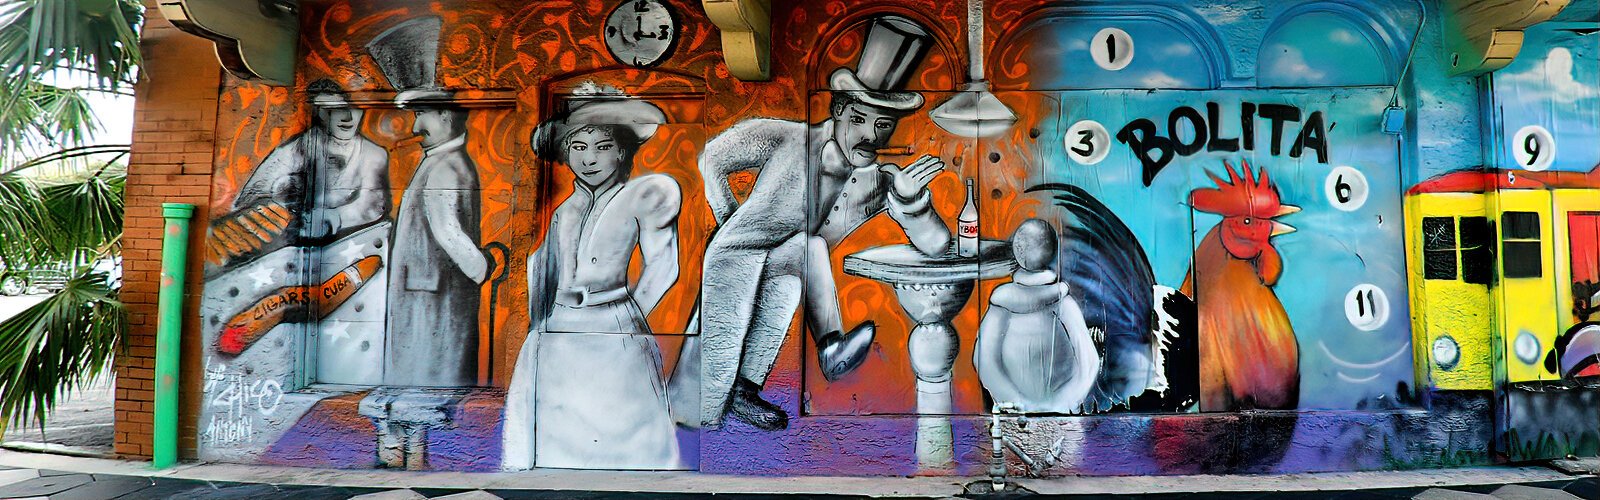 Vibrant murals reflect Ybor’s history and magnetic charm.